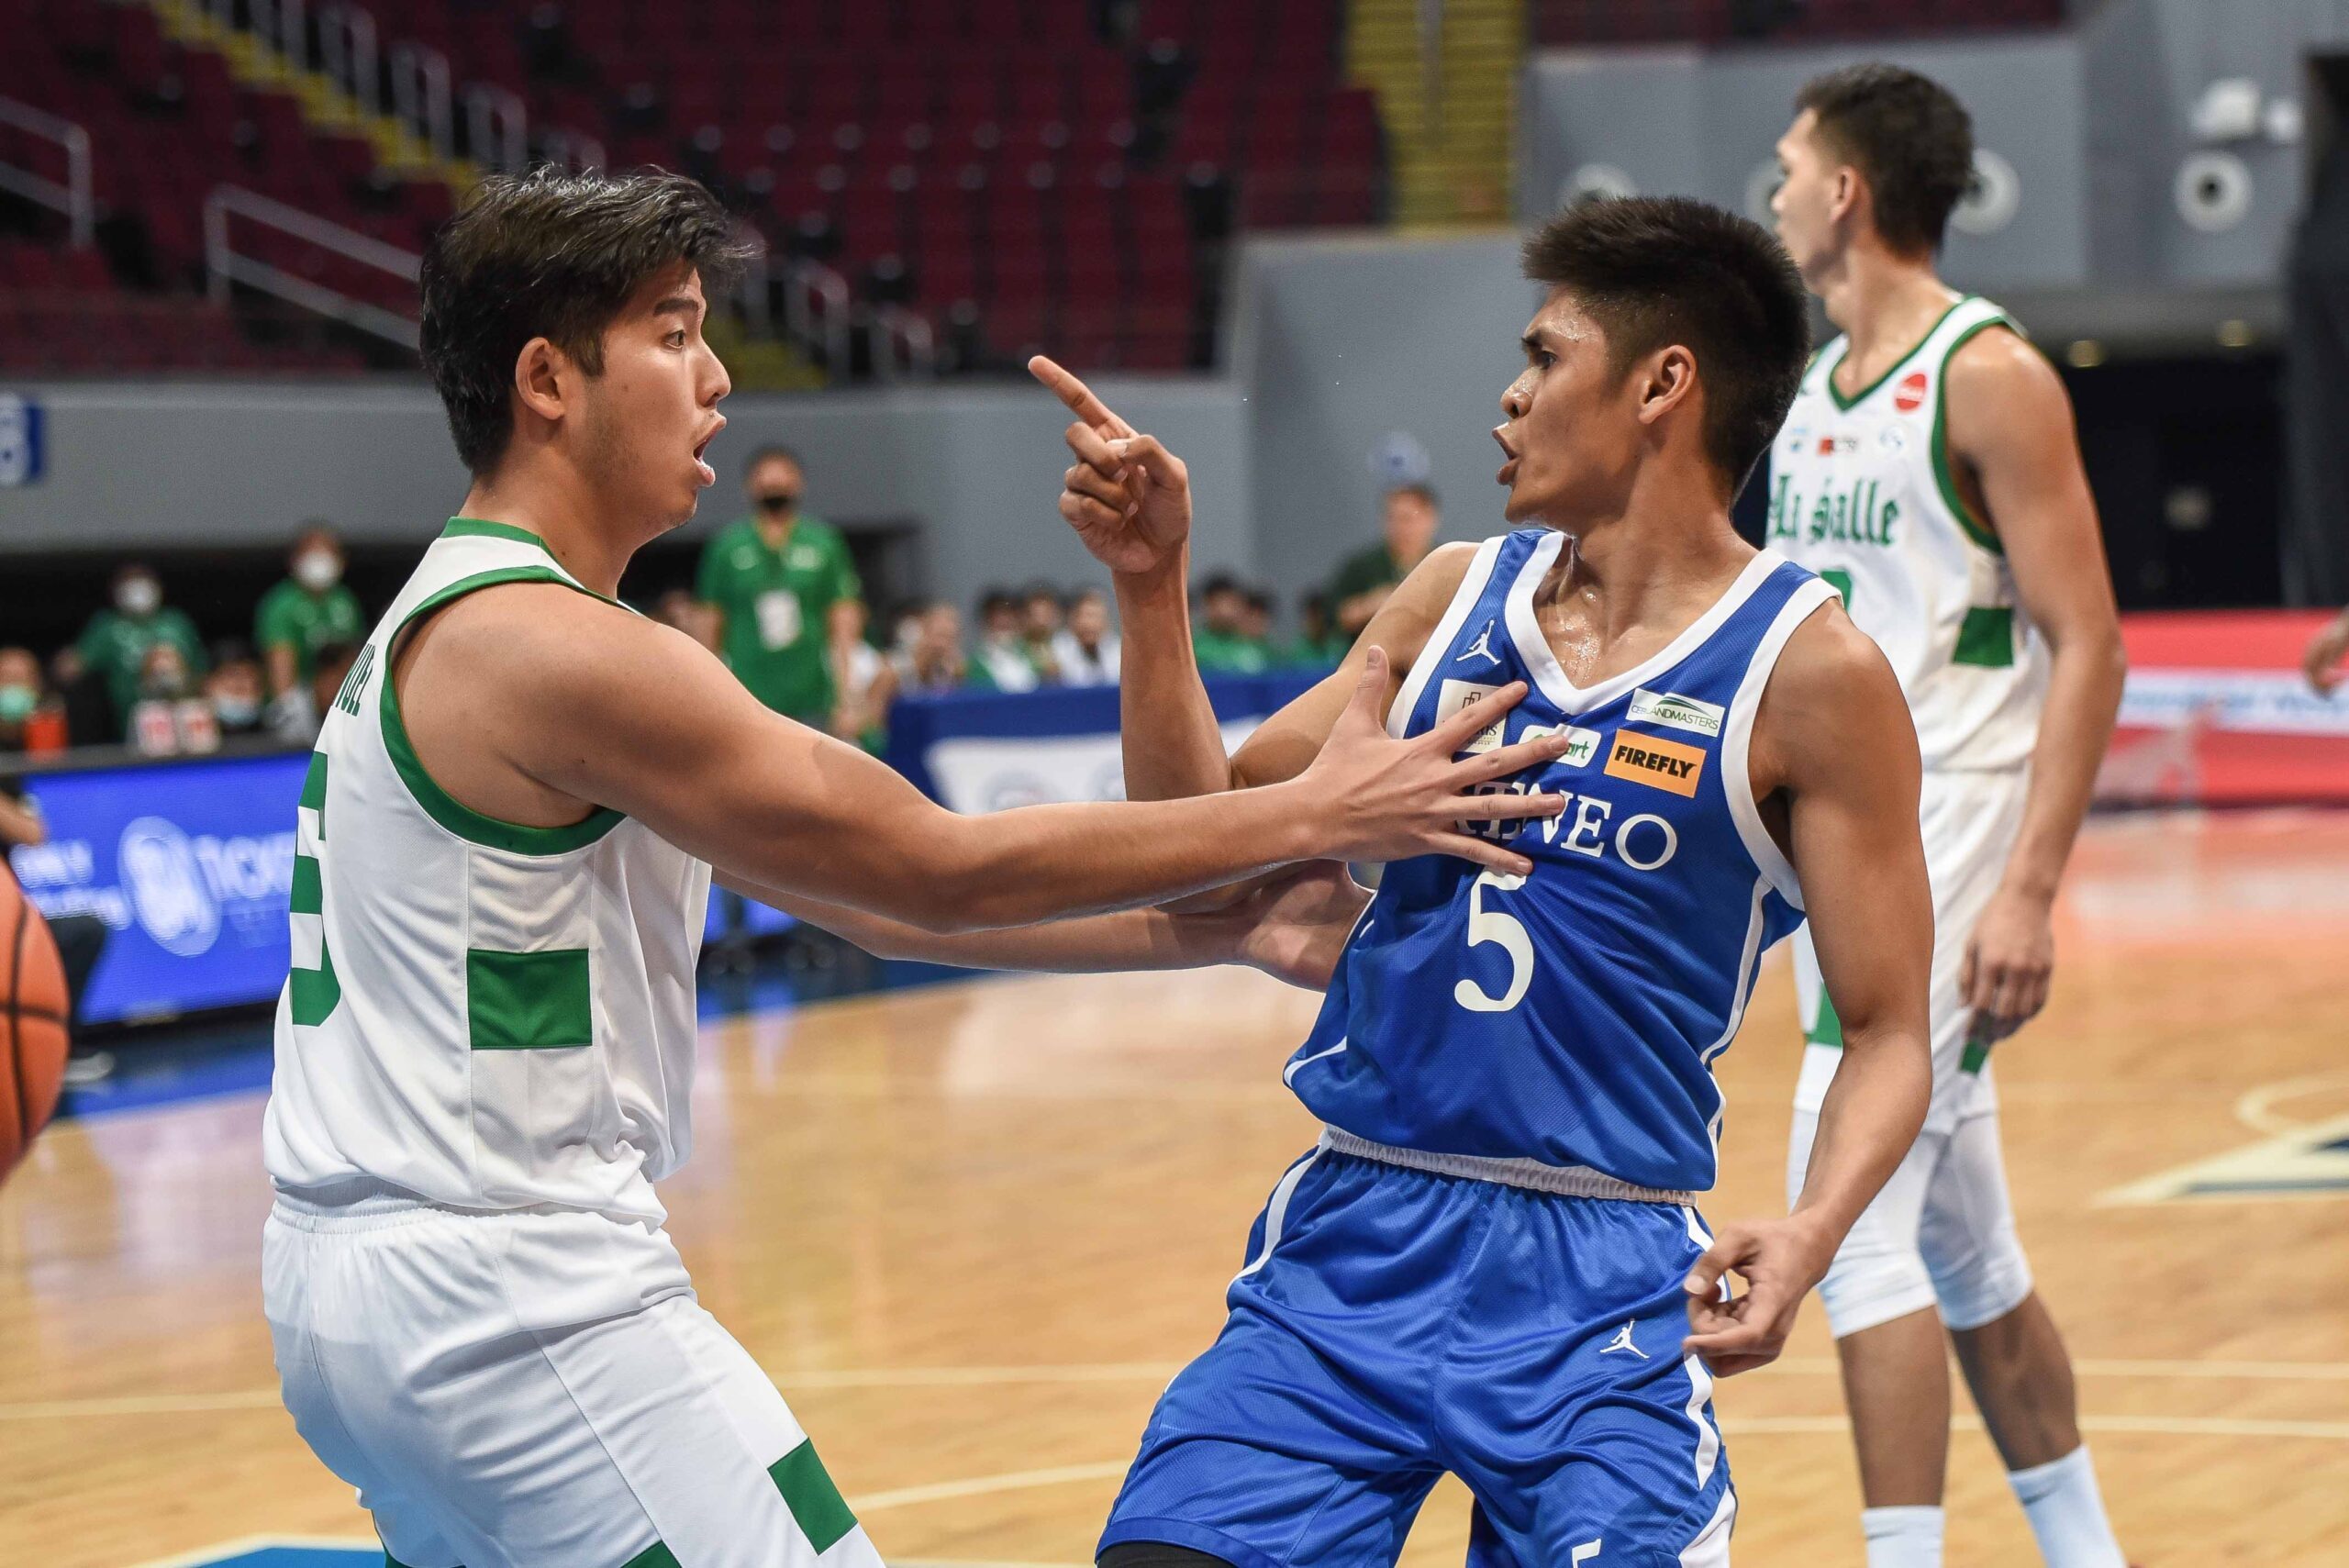 Ateneo captain Gian Mamuyac credits coaches’ preps for DLSU after 6-steal game